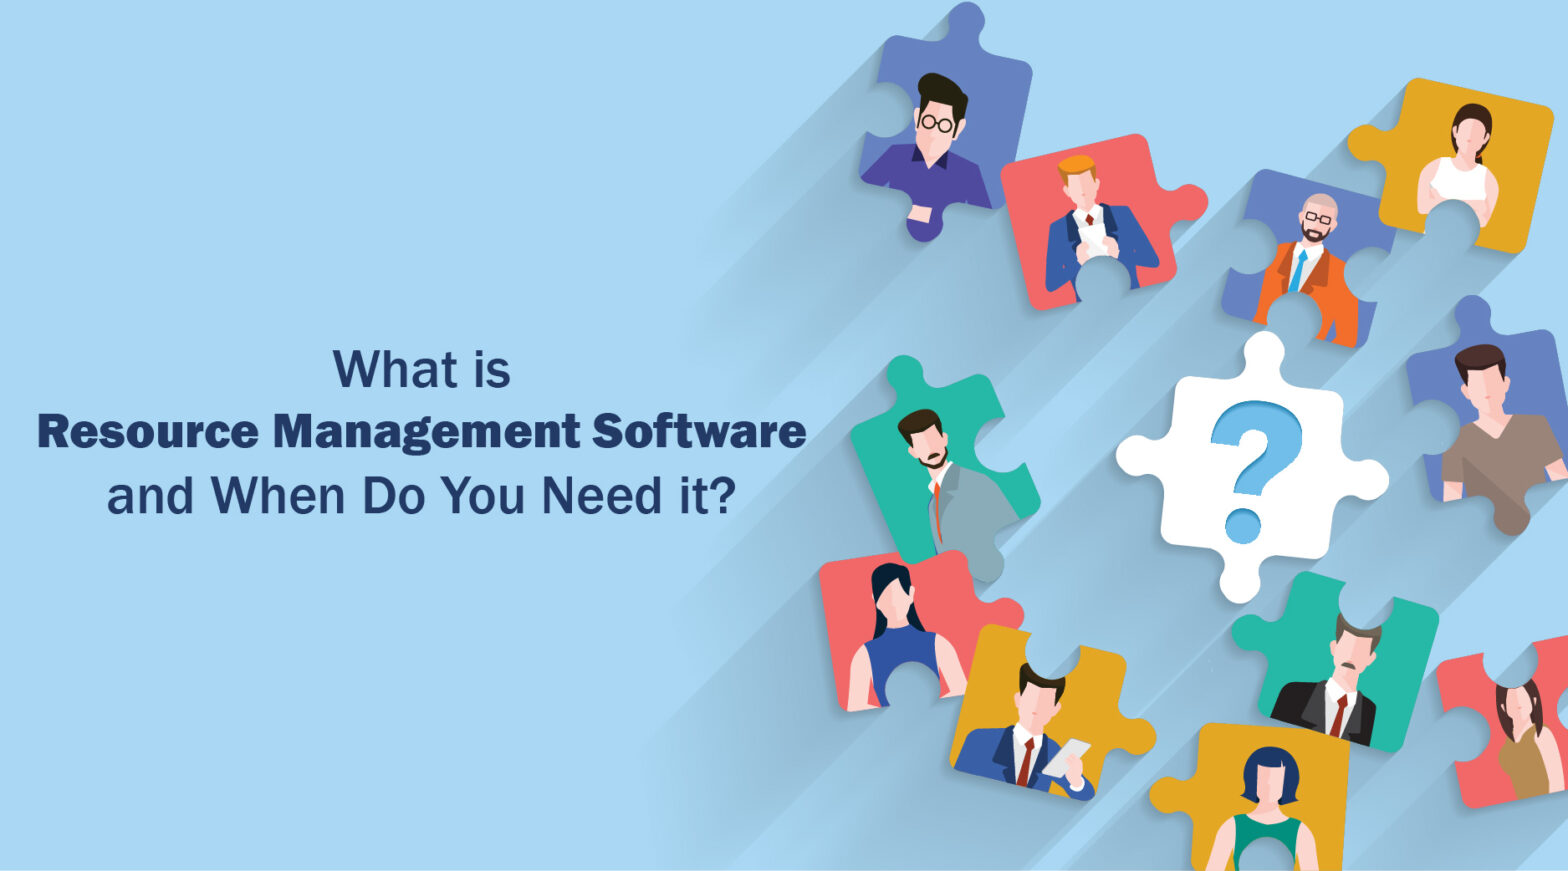 What is Resource Management Software and When Do You Need it